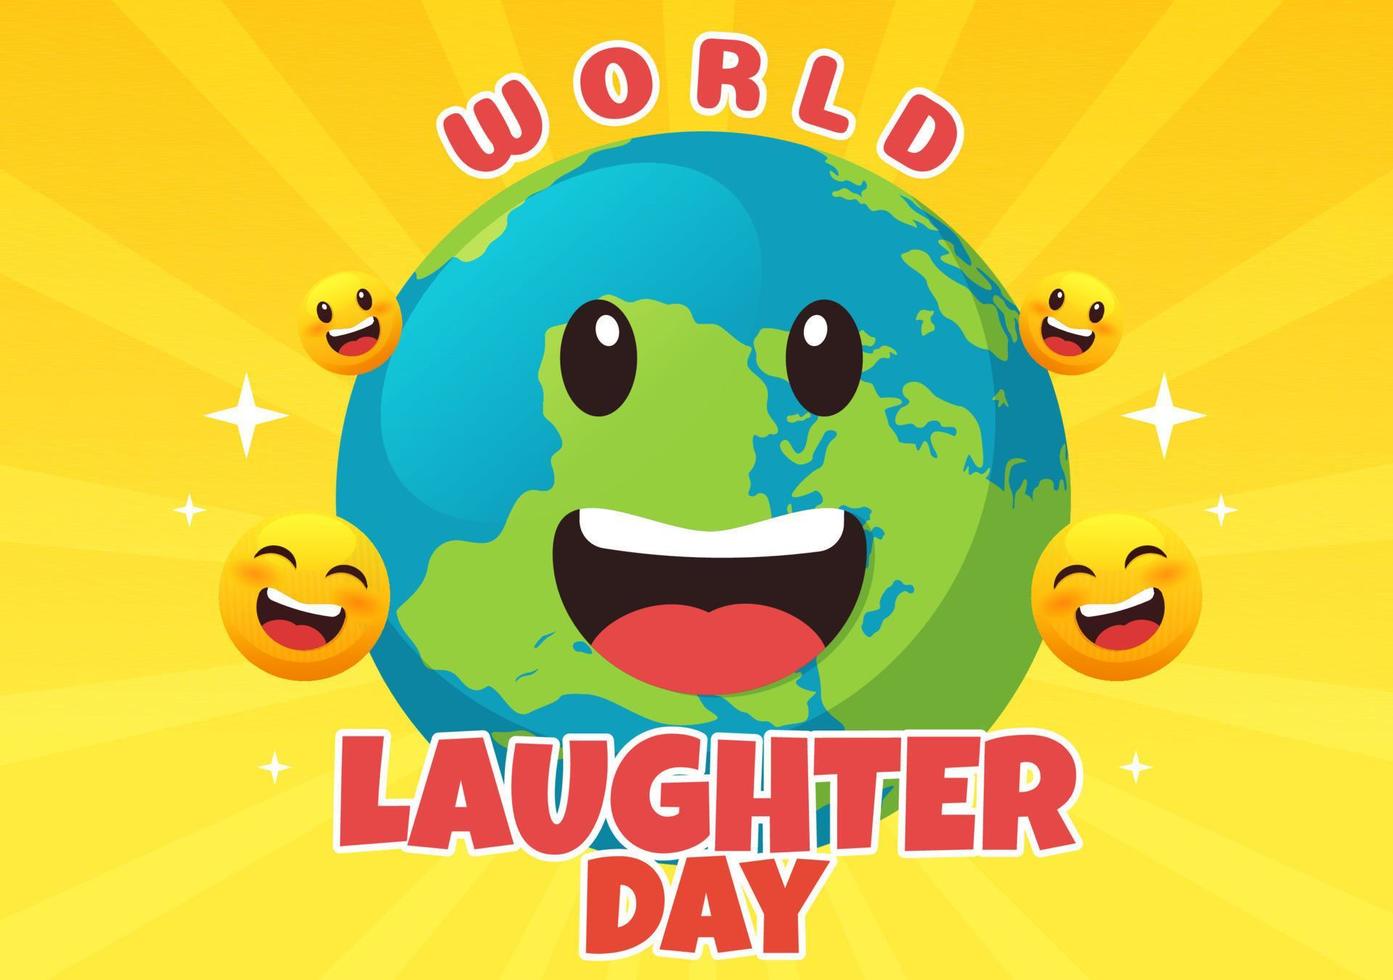 World Laughter Day Illustration with Smiley Facial Expression Cute for Web Banner or Landing Page in Flat Cartoon Hand Drawn Templates vector